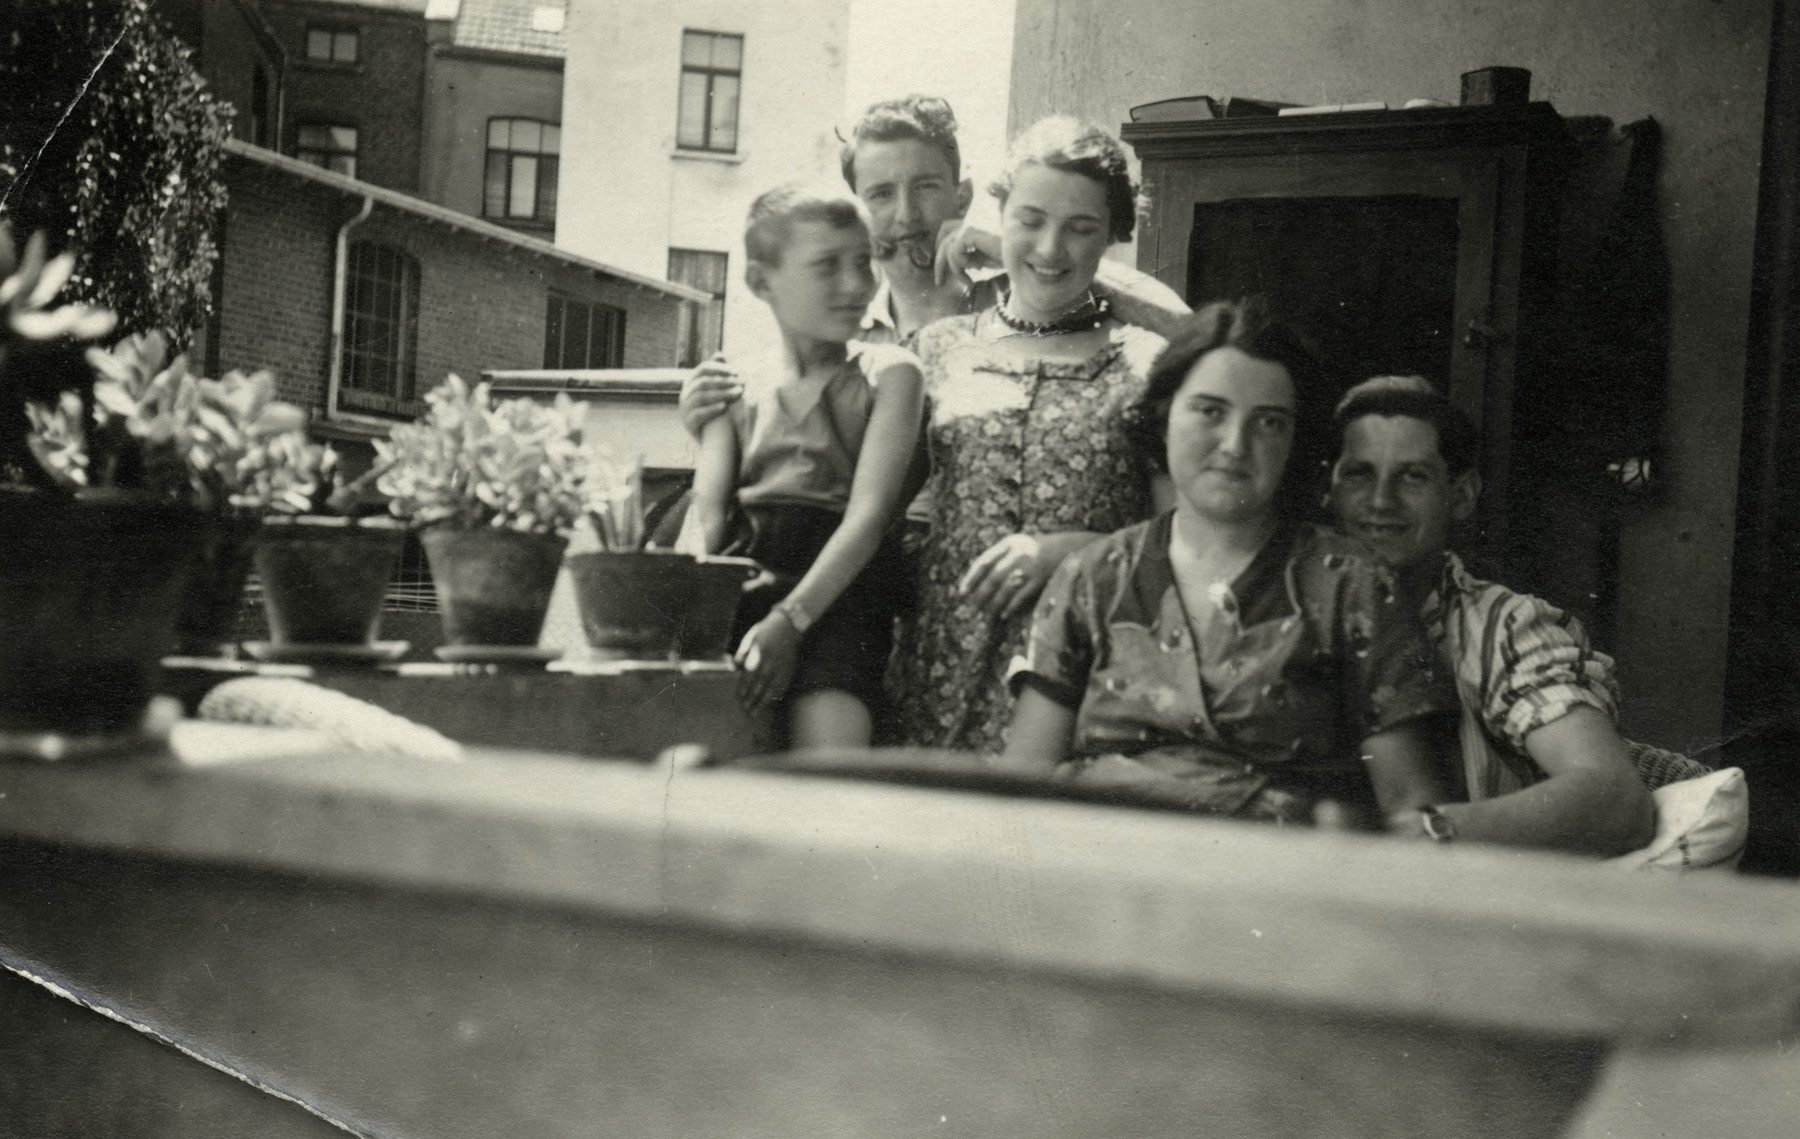 The Meyer children pose on the balcony of their home.

On the far left is Guss Meyer with his sister Erika and brother Herbert. On the right is Gus'older sister Theresa and her husband Carl.